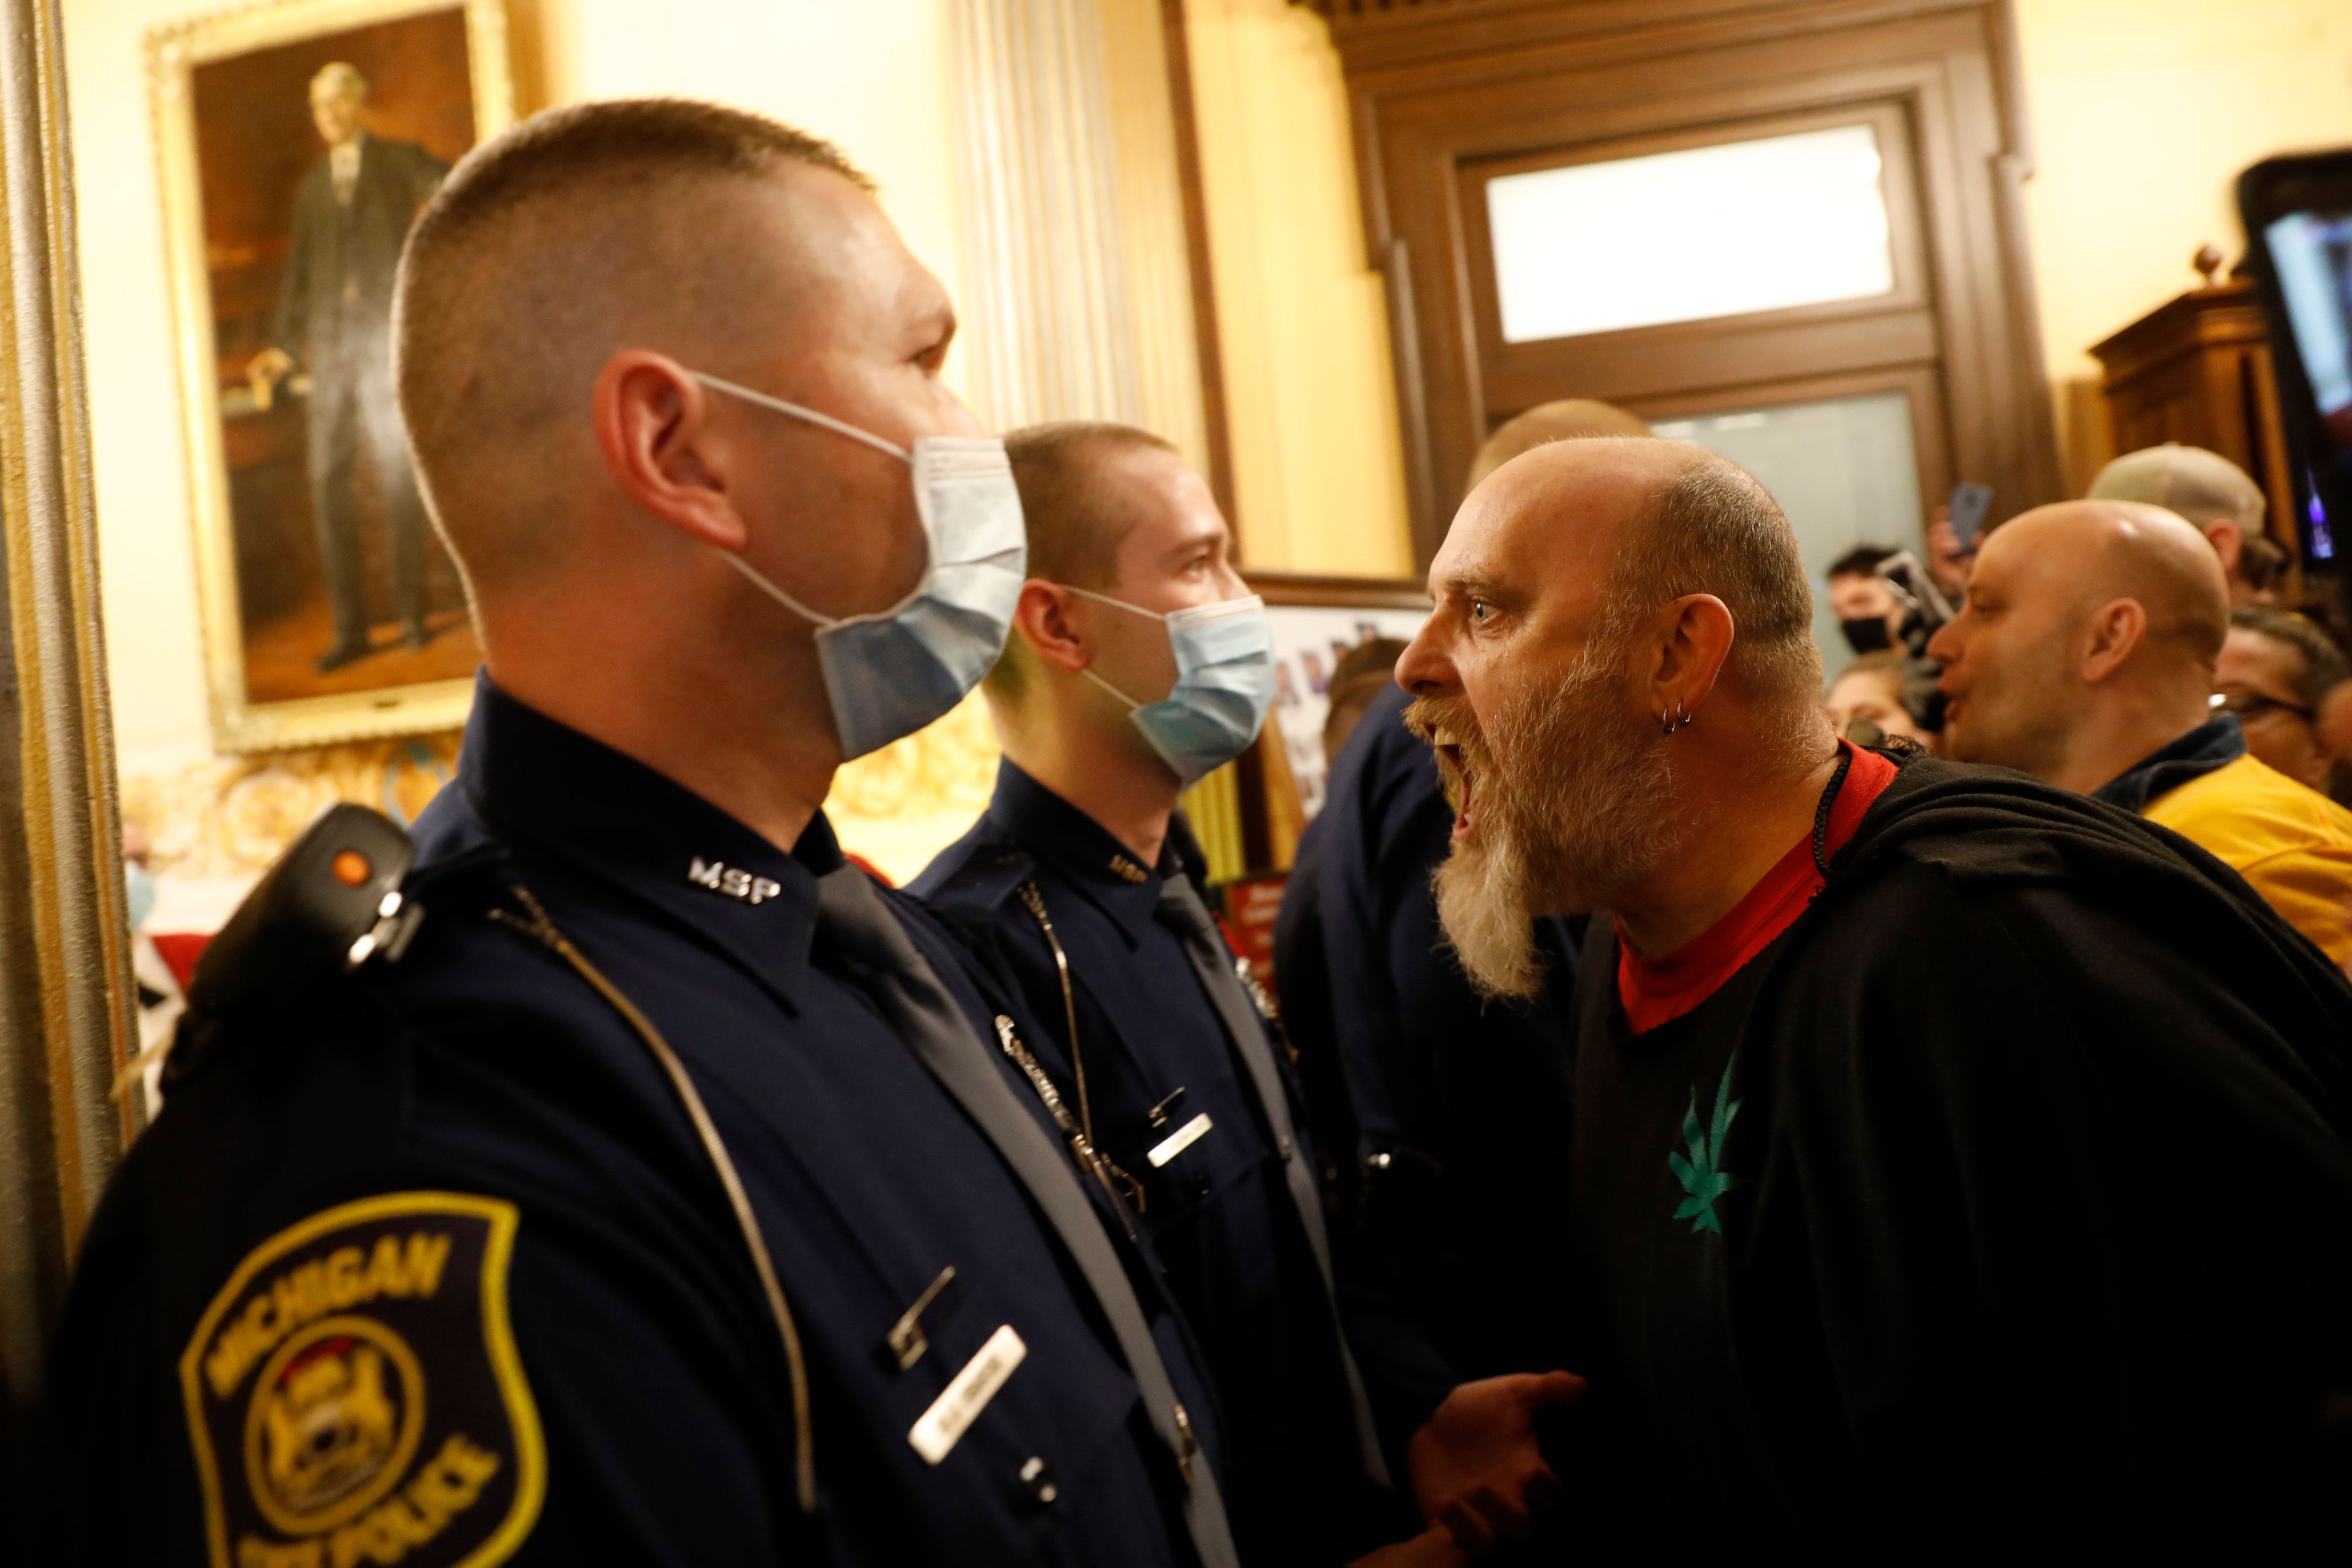 Protestors try to enter the Michigan House of Representative chamber and are being kept out by the Michigan State Police